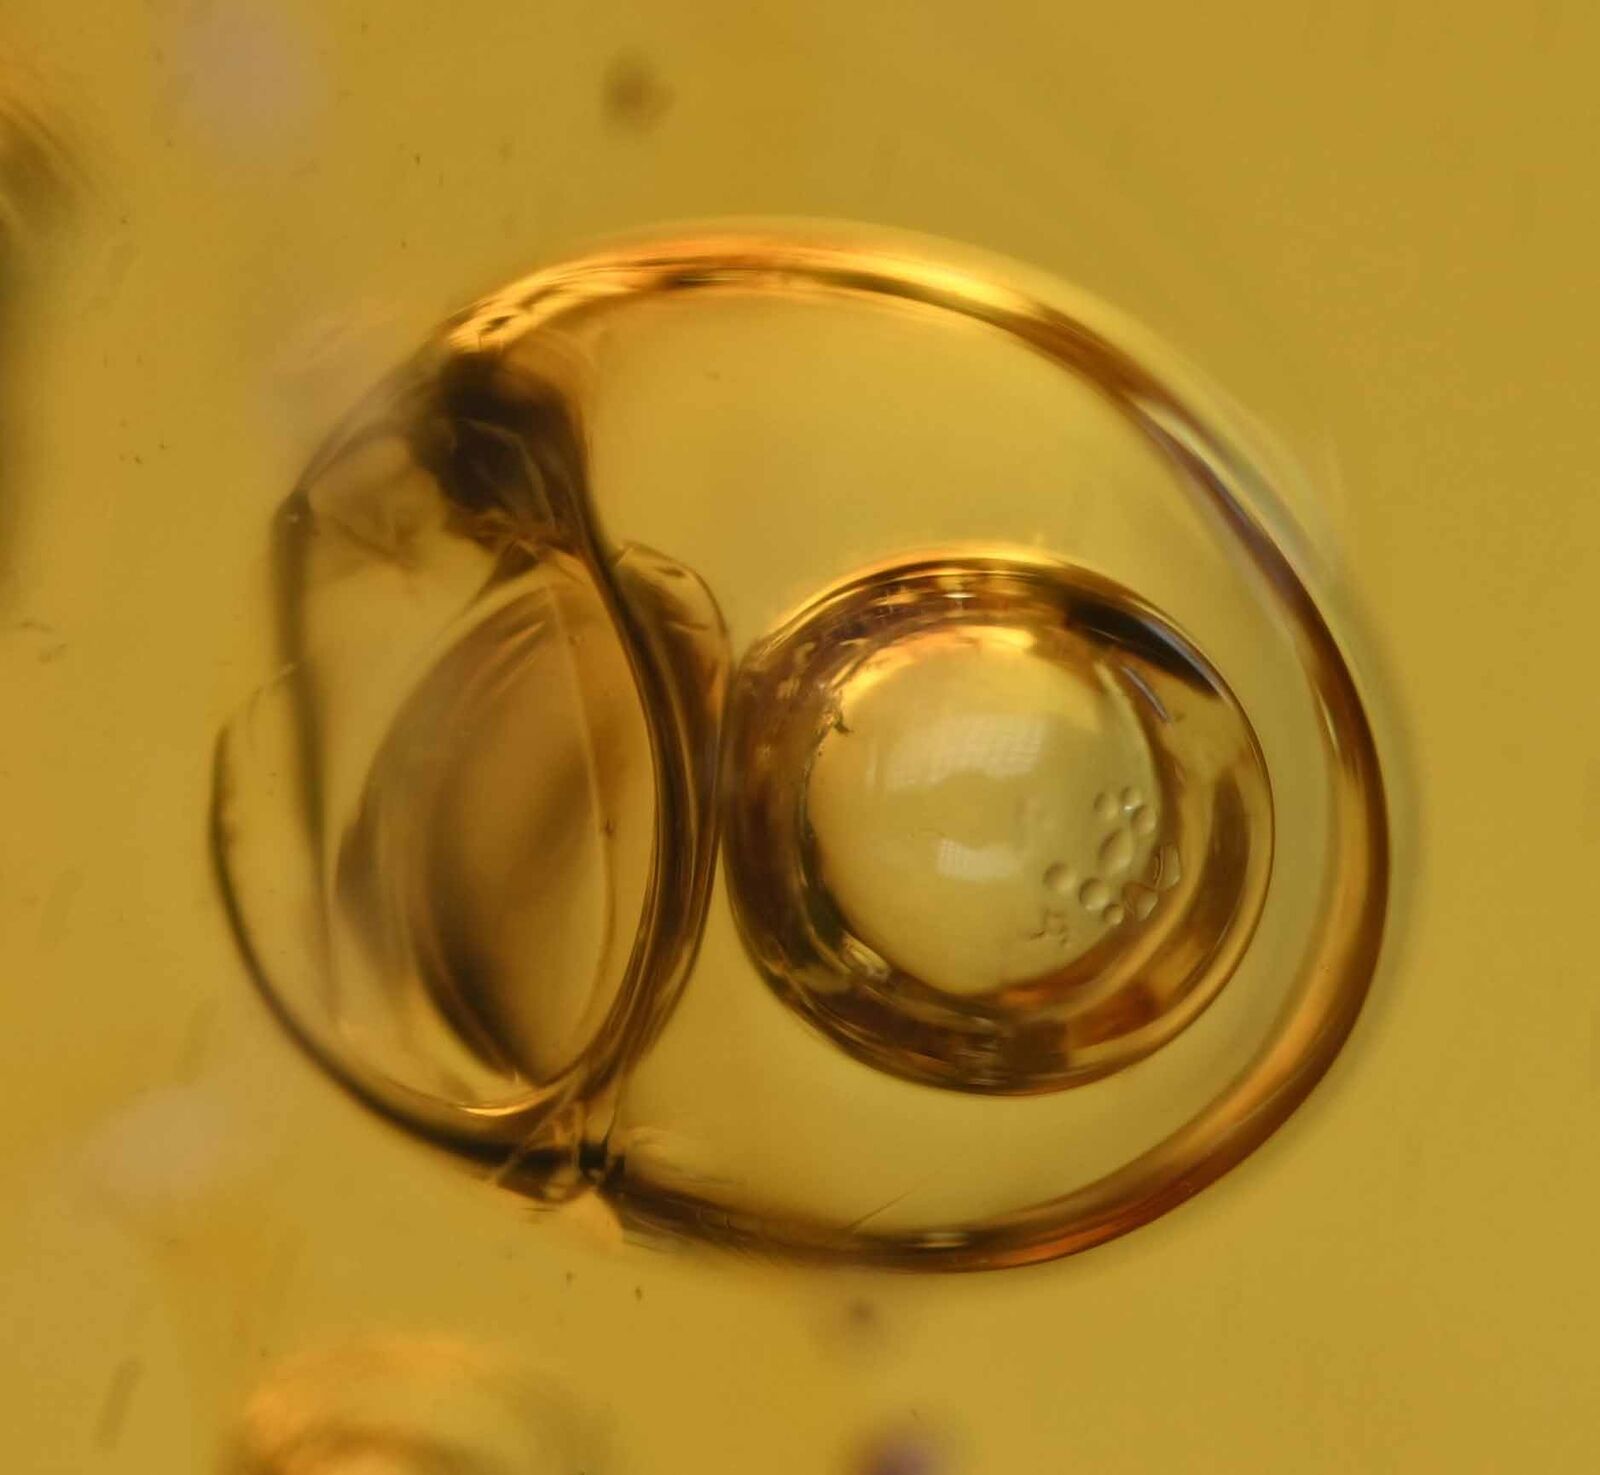 Rare Movable Enhydro Water Bubble, Fossil Inclusion in Dominican Amber